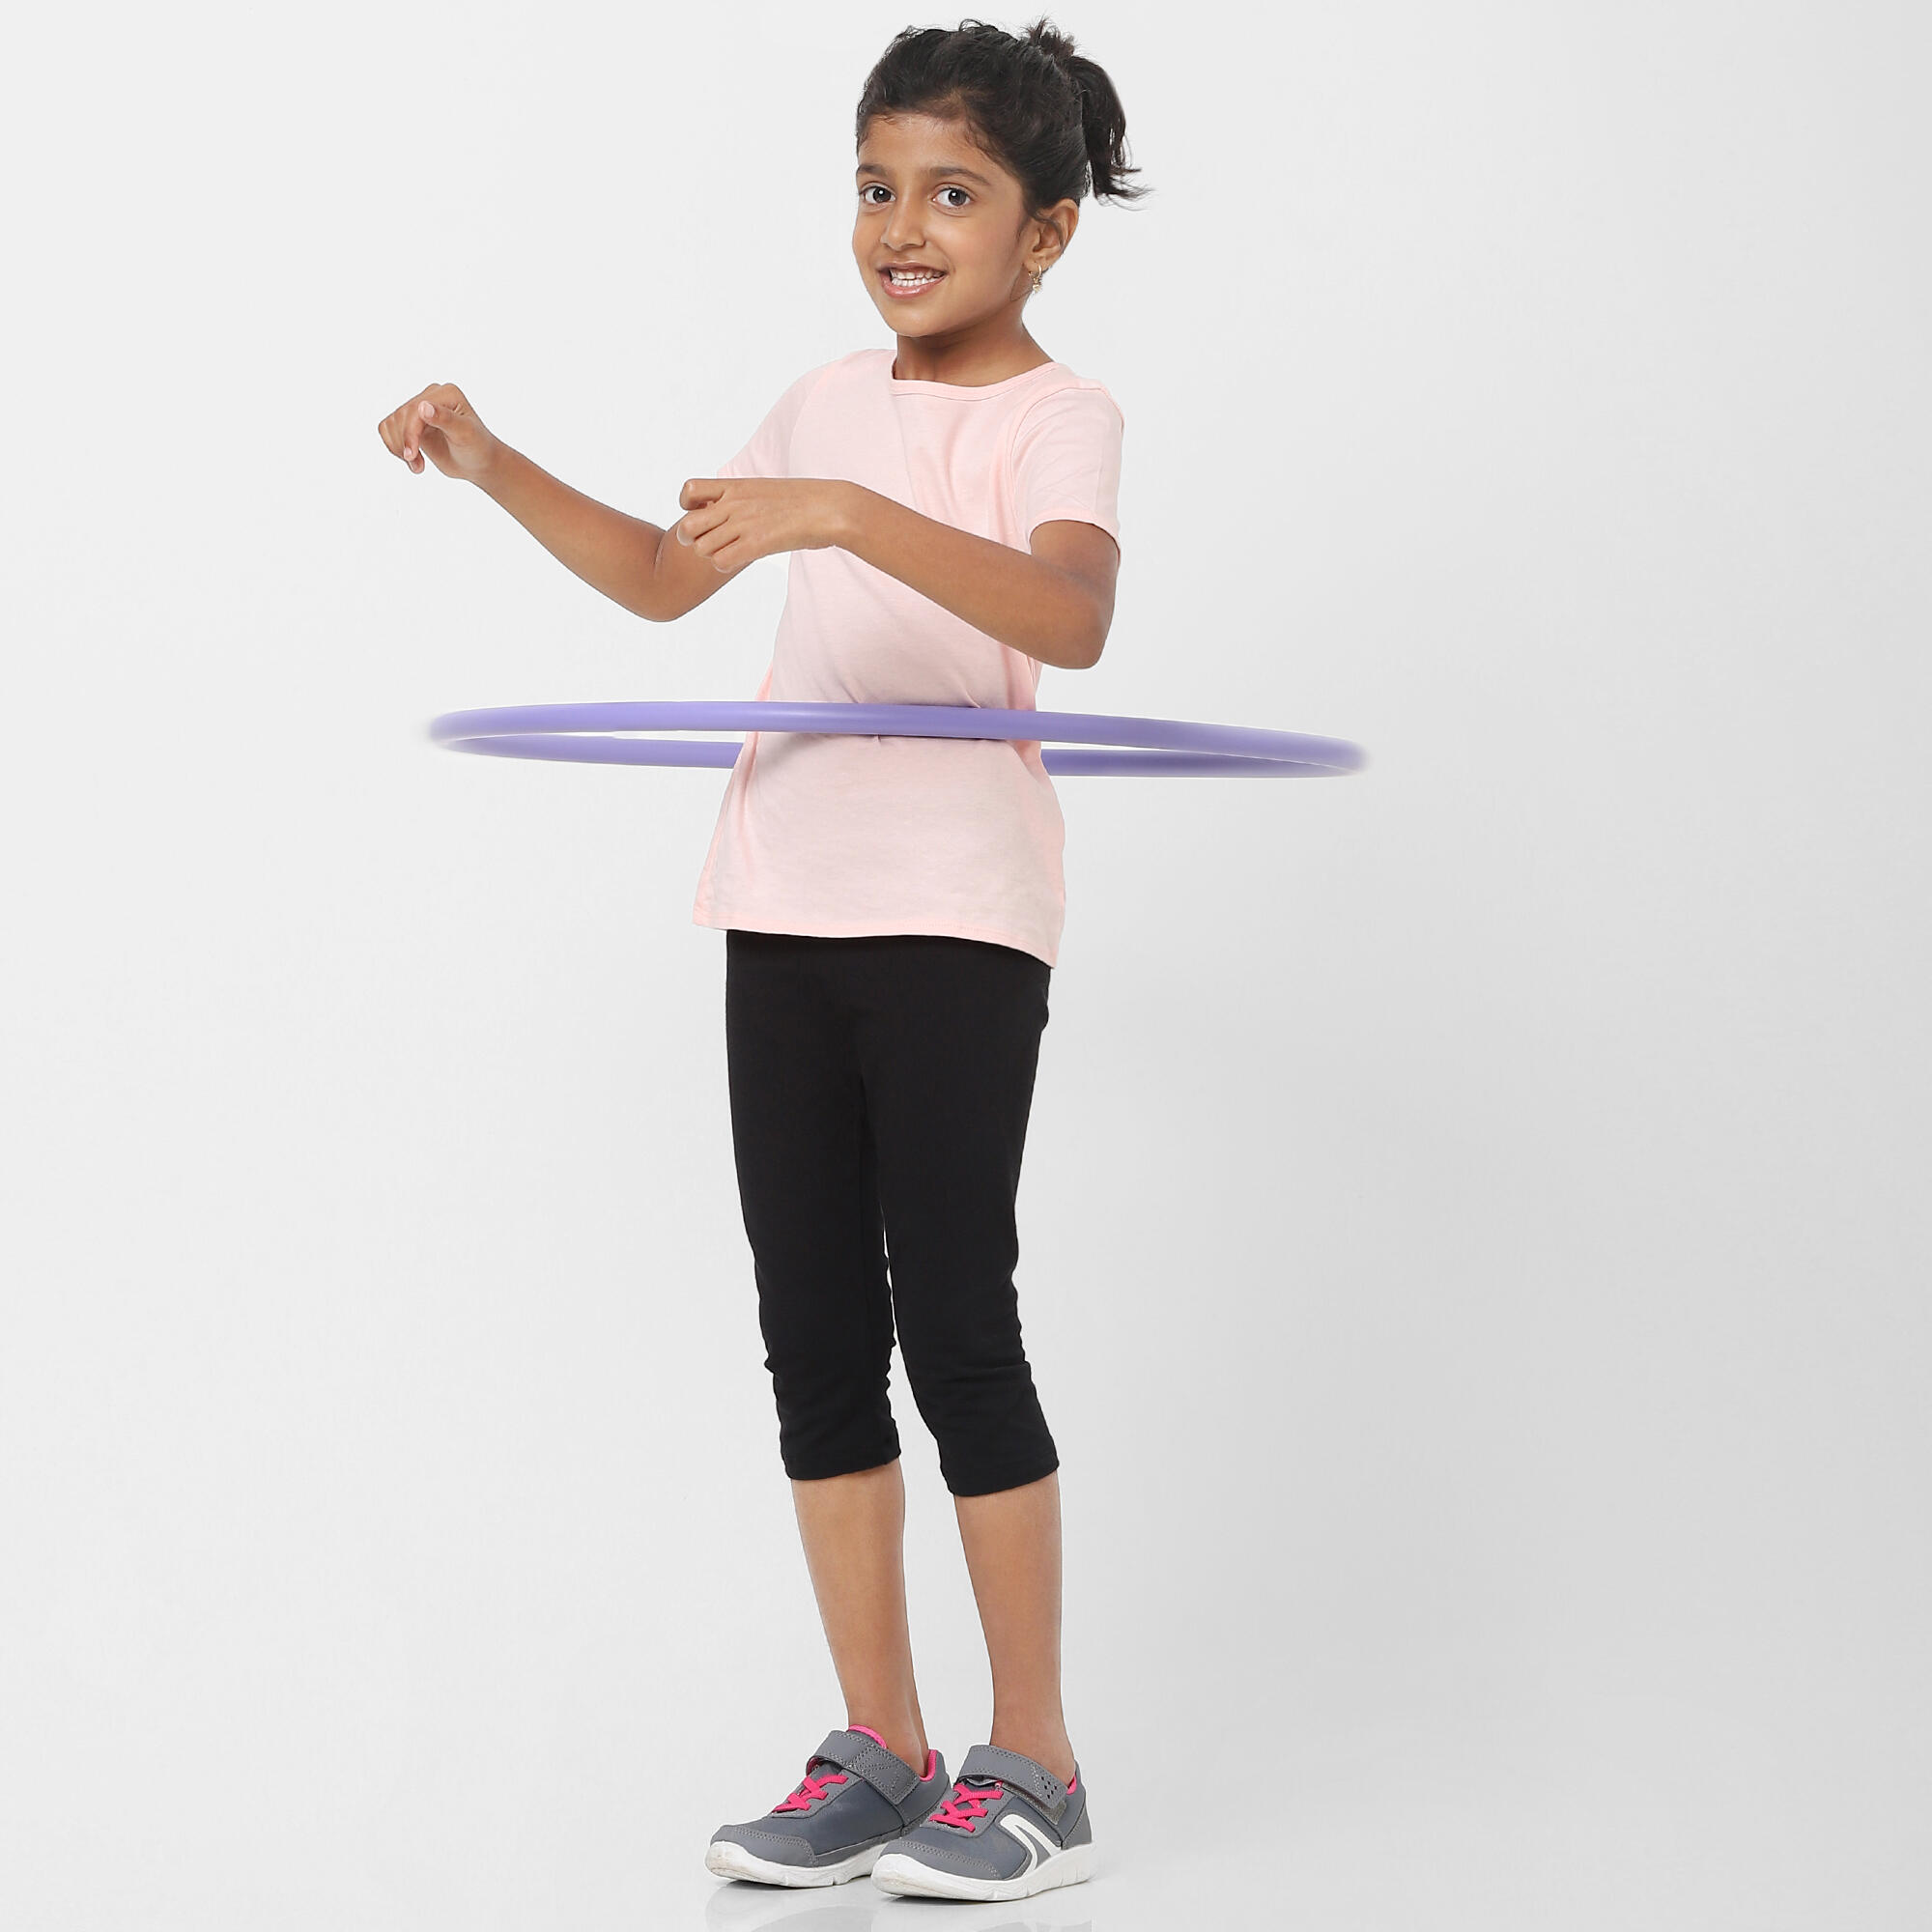 Buy VARIYA ENTERPRISE Hula Hoop, Hoopa Hula, Exercise Ring for Fitness with  80 CM Diameter for Boys,Girls, Kids and Adults - Multi Color (Pack of 1)  Online at Low Prices in India -